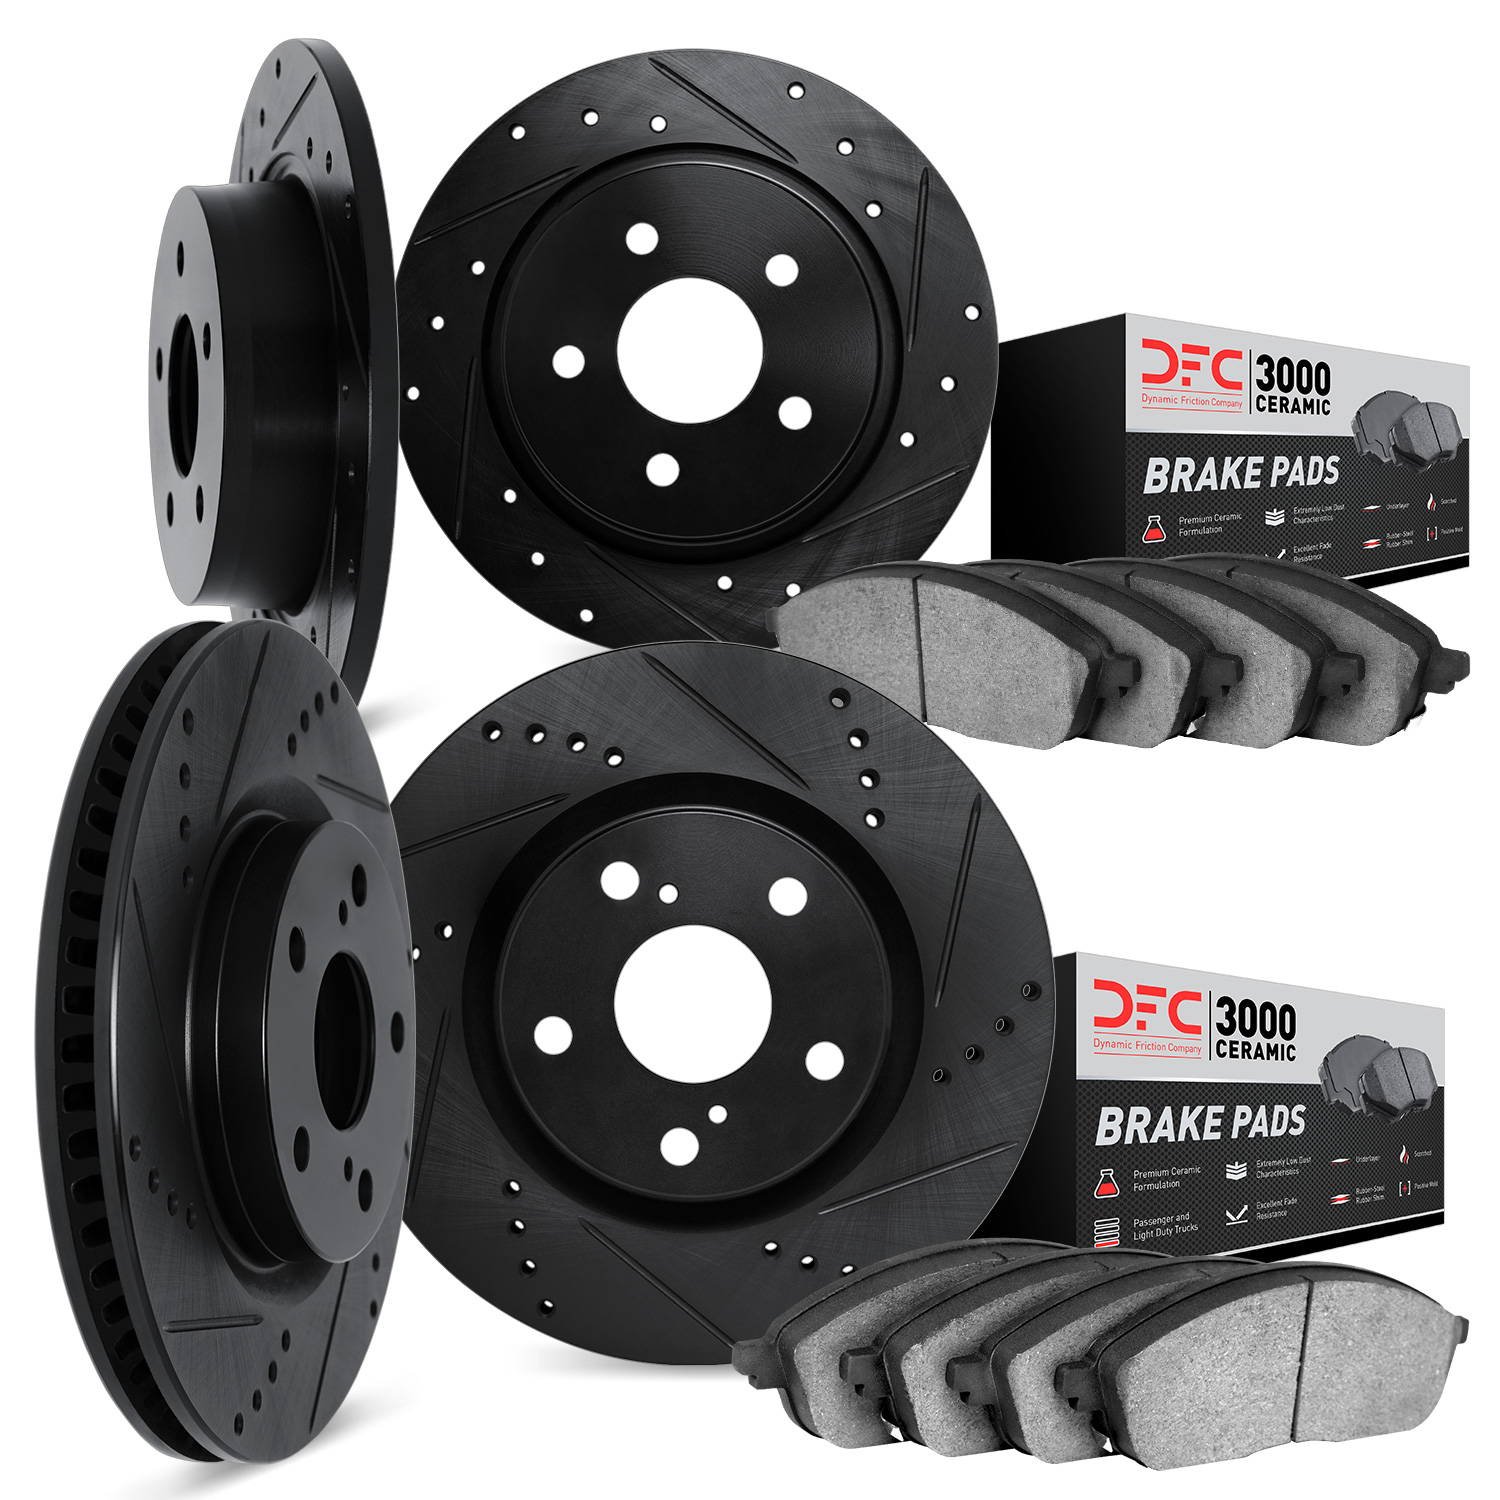 8304-39008 Drilled/Slotted Brake Rotors with 3000-Series Ceramic Brake Pads Kit [Black], 2010-2010 Mopar, Position: Front and Re